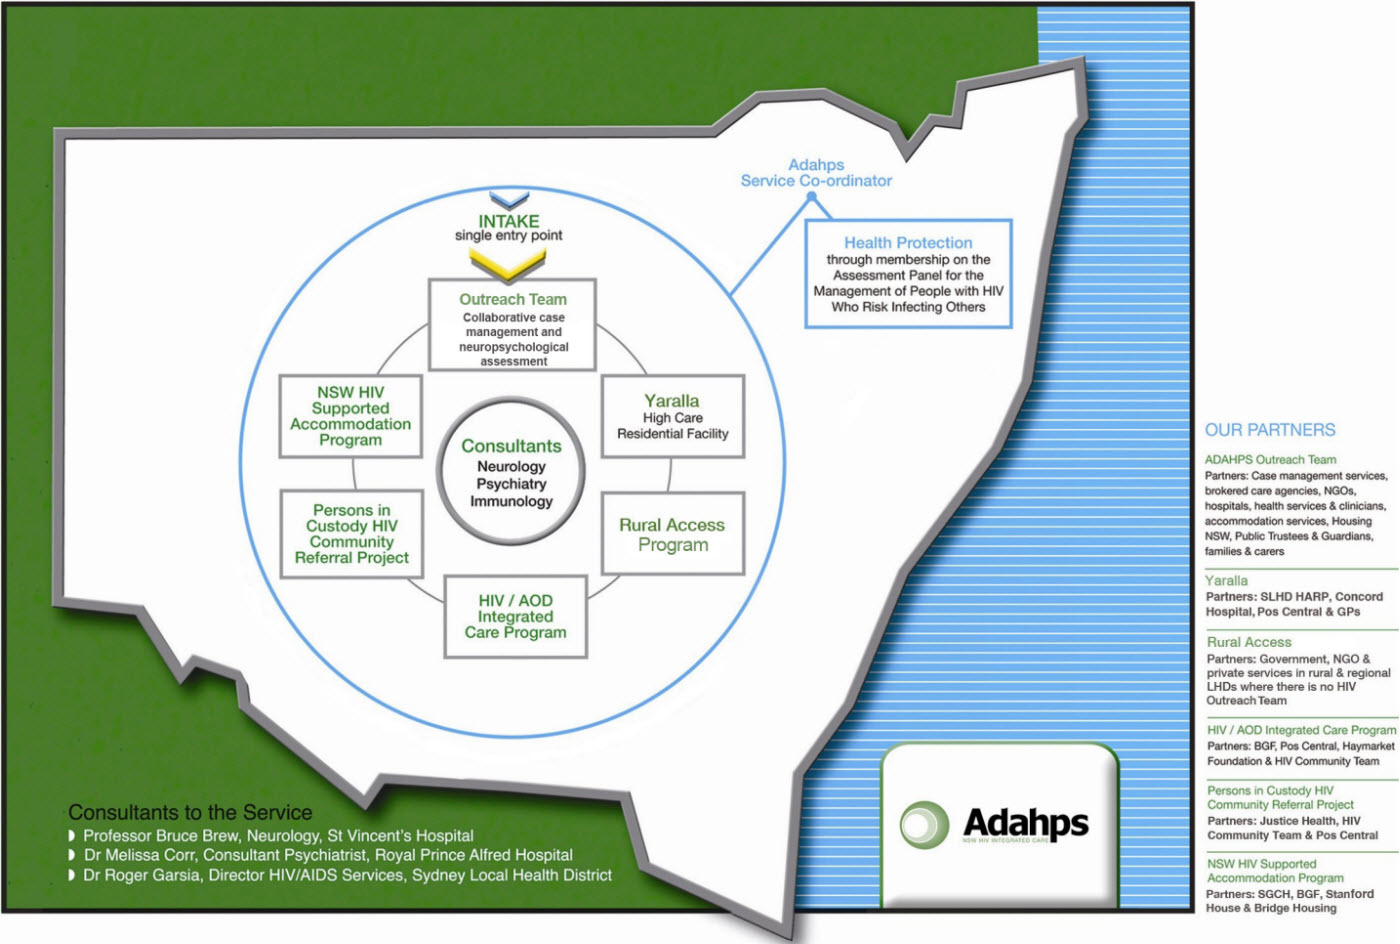 Adhaps service delivery model, text alternative follows